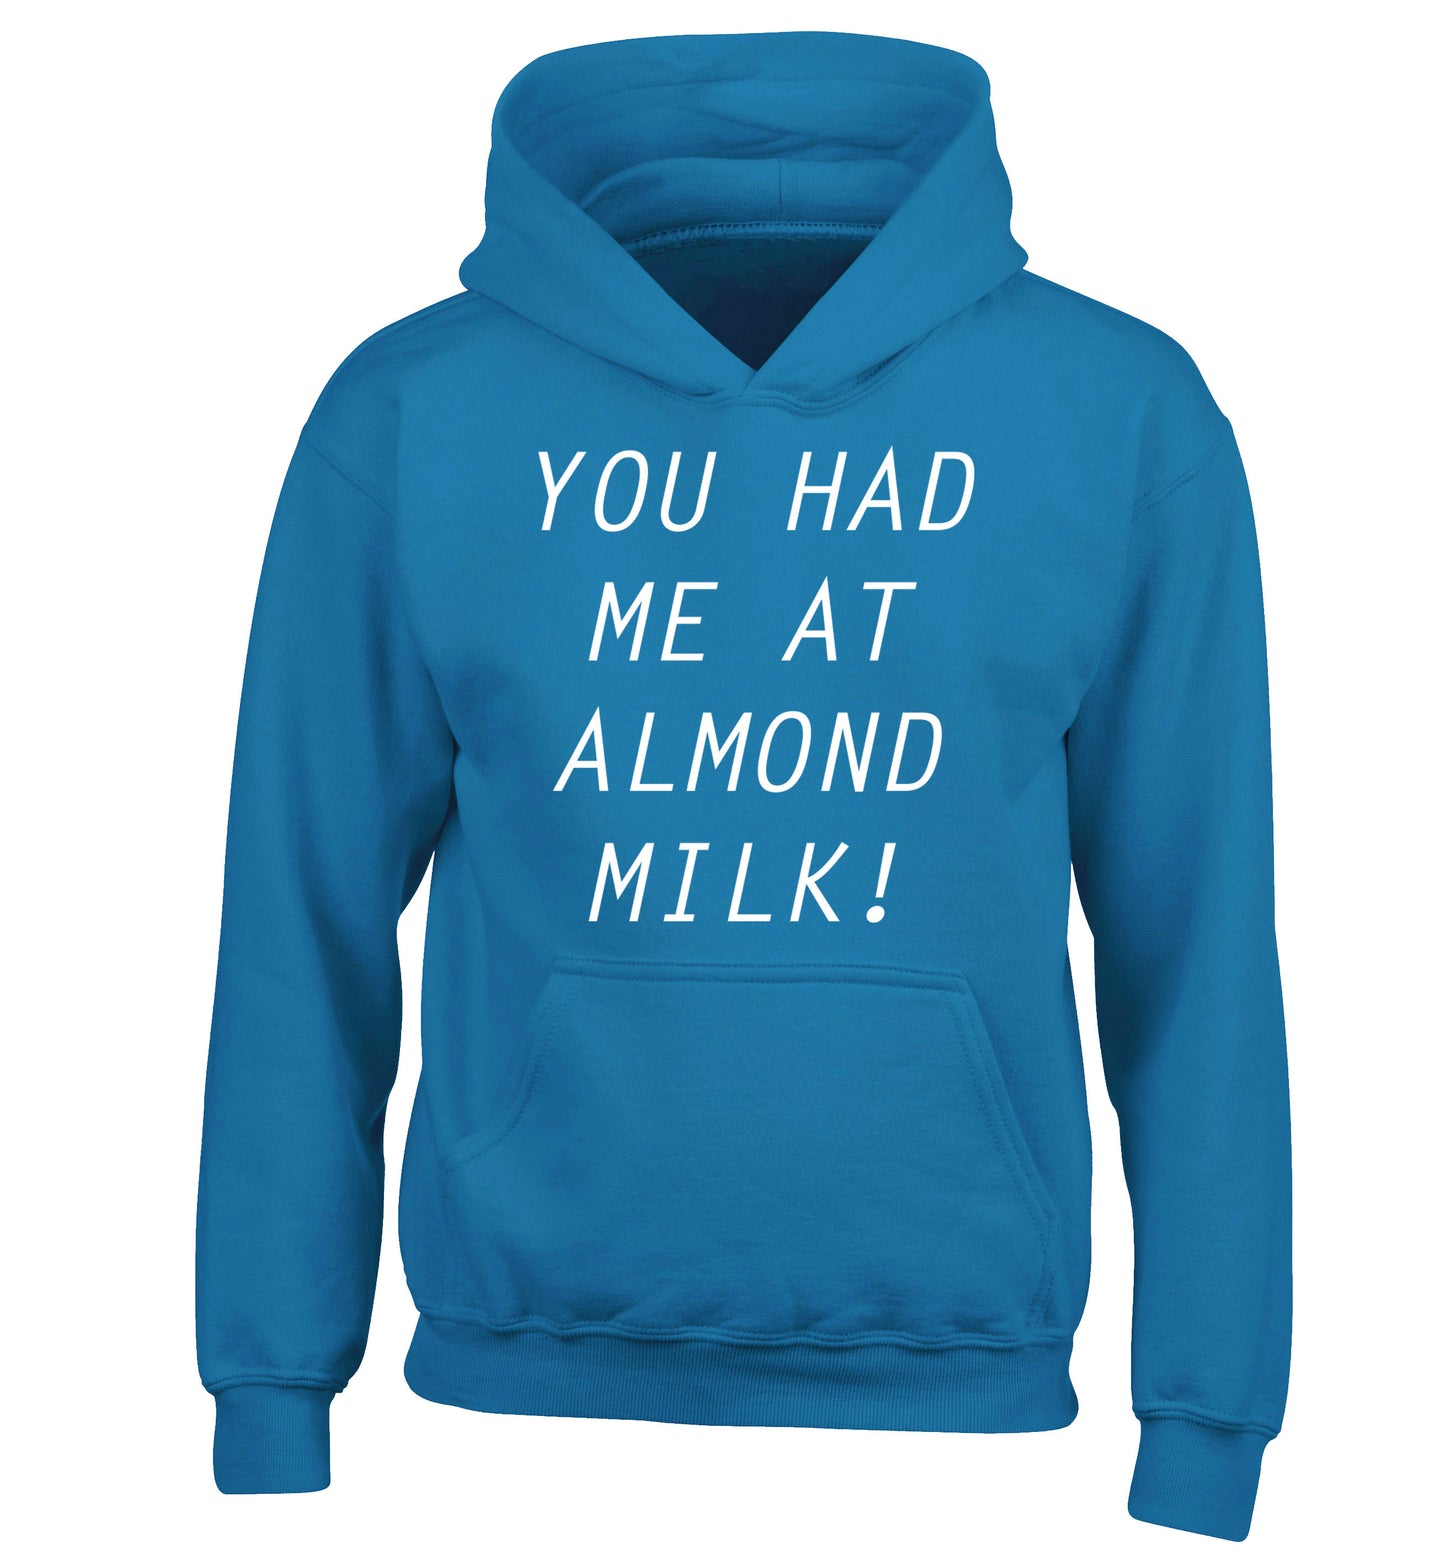 You had me at almond milk children's blue hoodie 12-14 Years